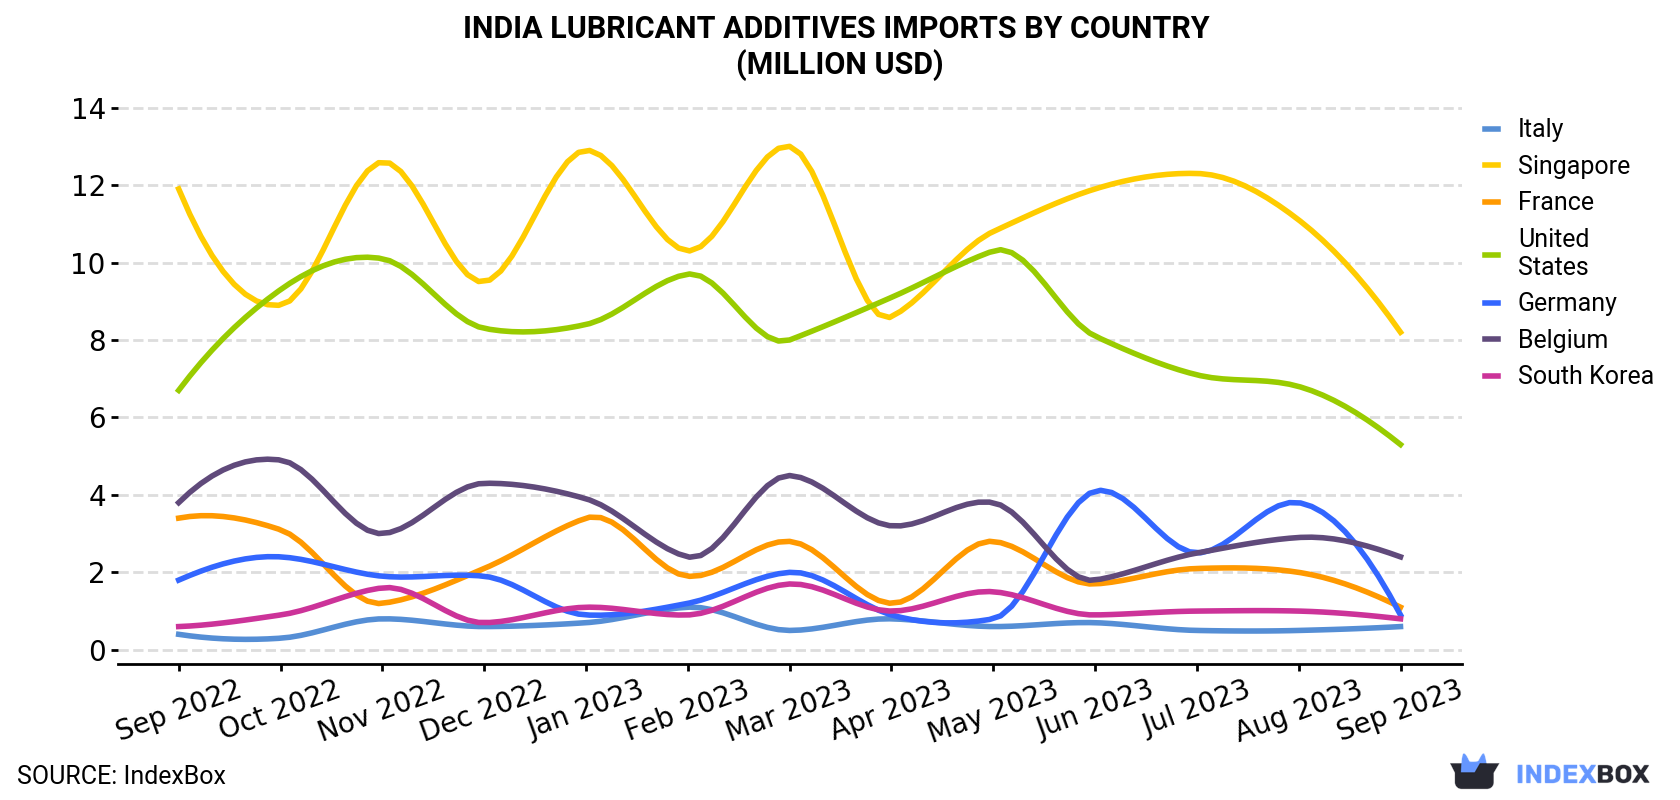 India Lubricant Additives Imports By Country (Million USD)